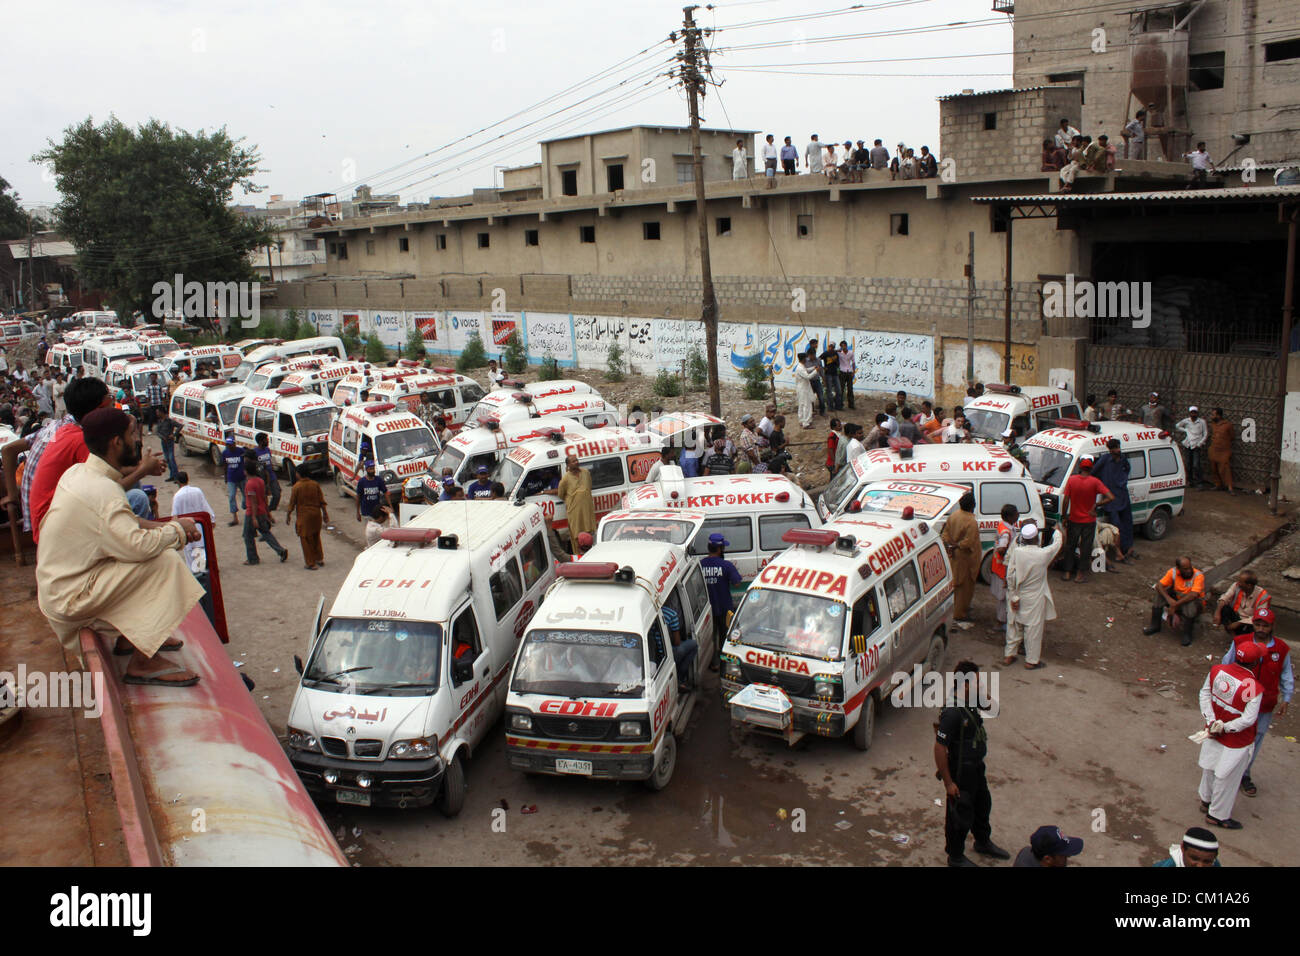 Karachi, Pakistan. 12th September, 2012. Rescue workers carry out rescue work at the site of burnt garment factory in Karachi September 12, 2012. Atleast 289 workers were burnt when fire engulfed a garment factory in Karachi. Stock Photo